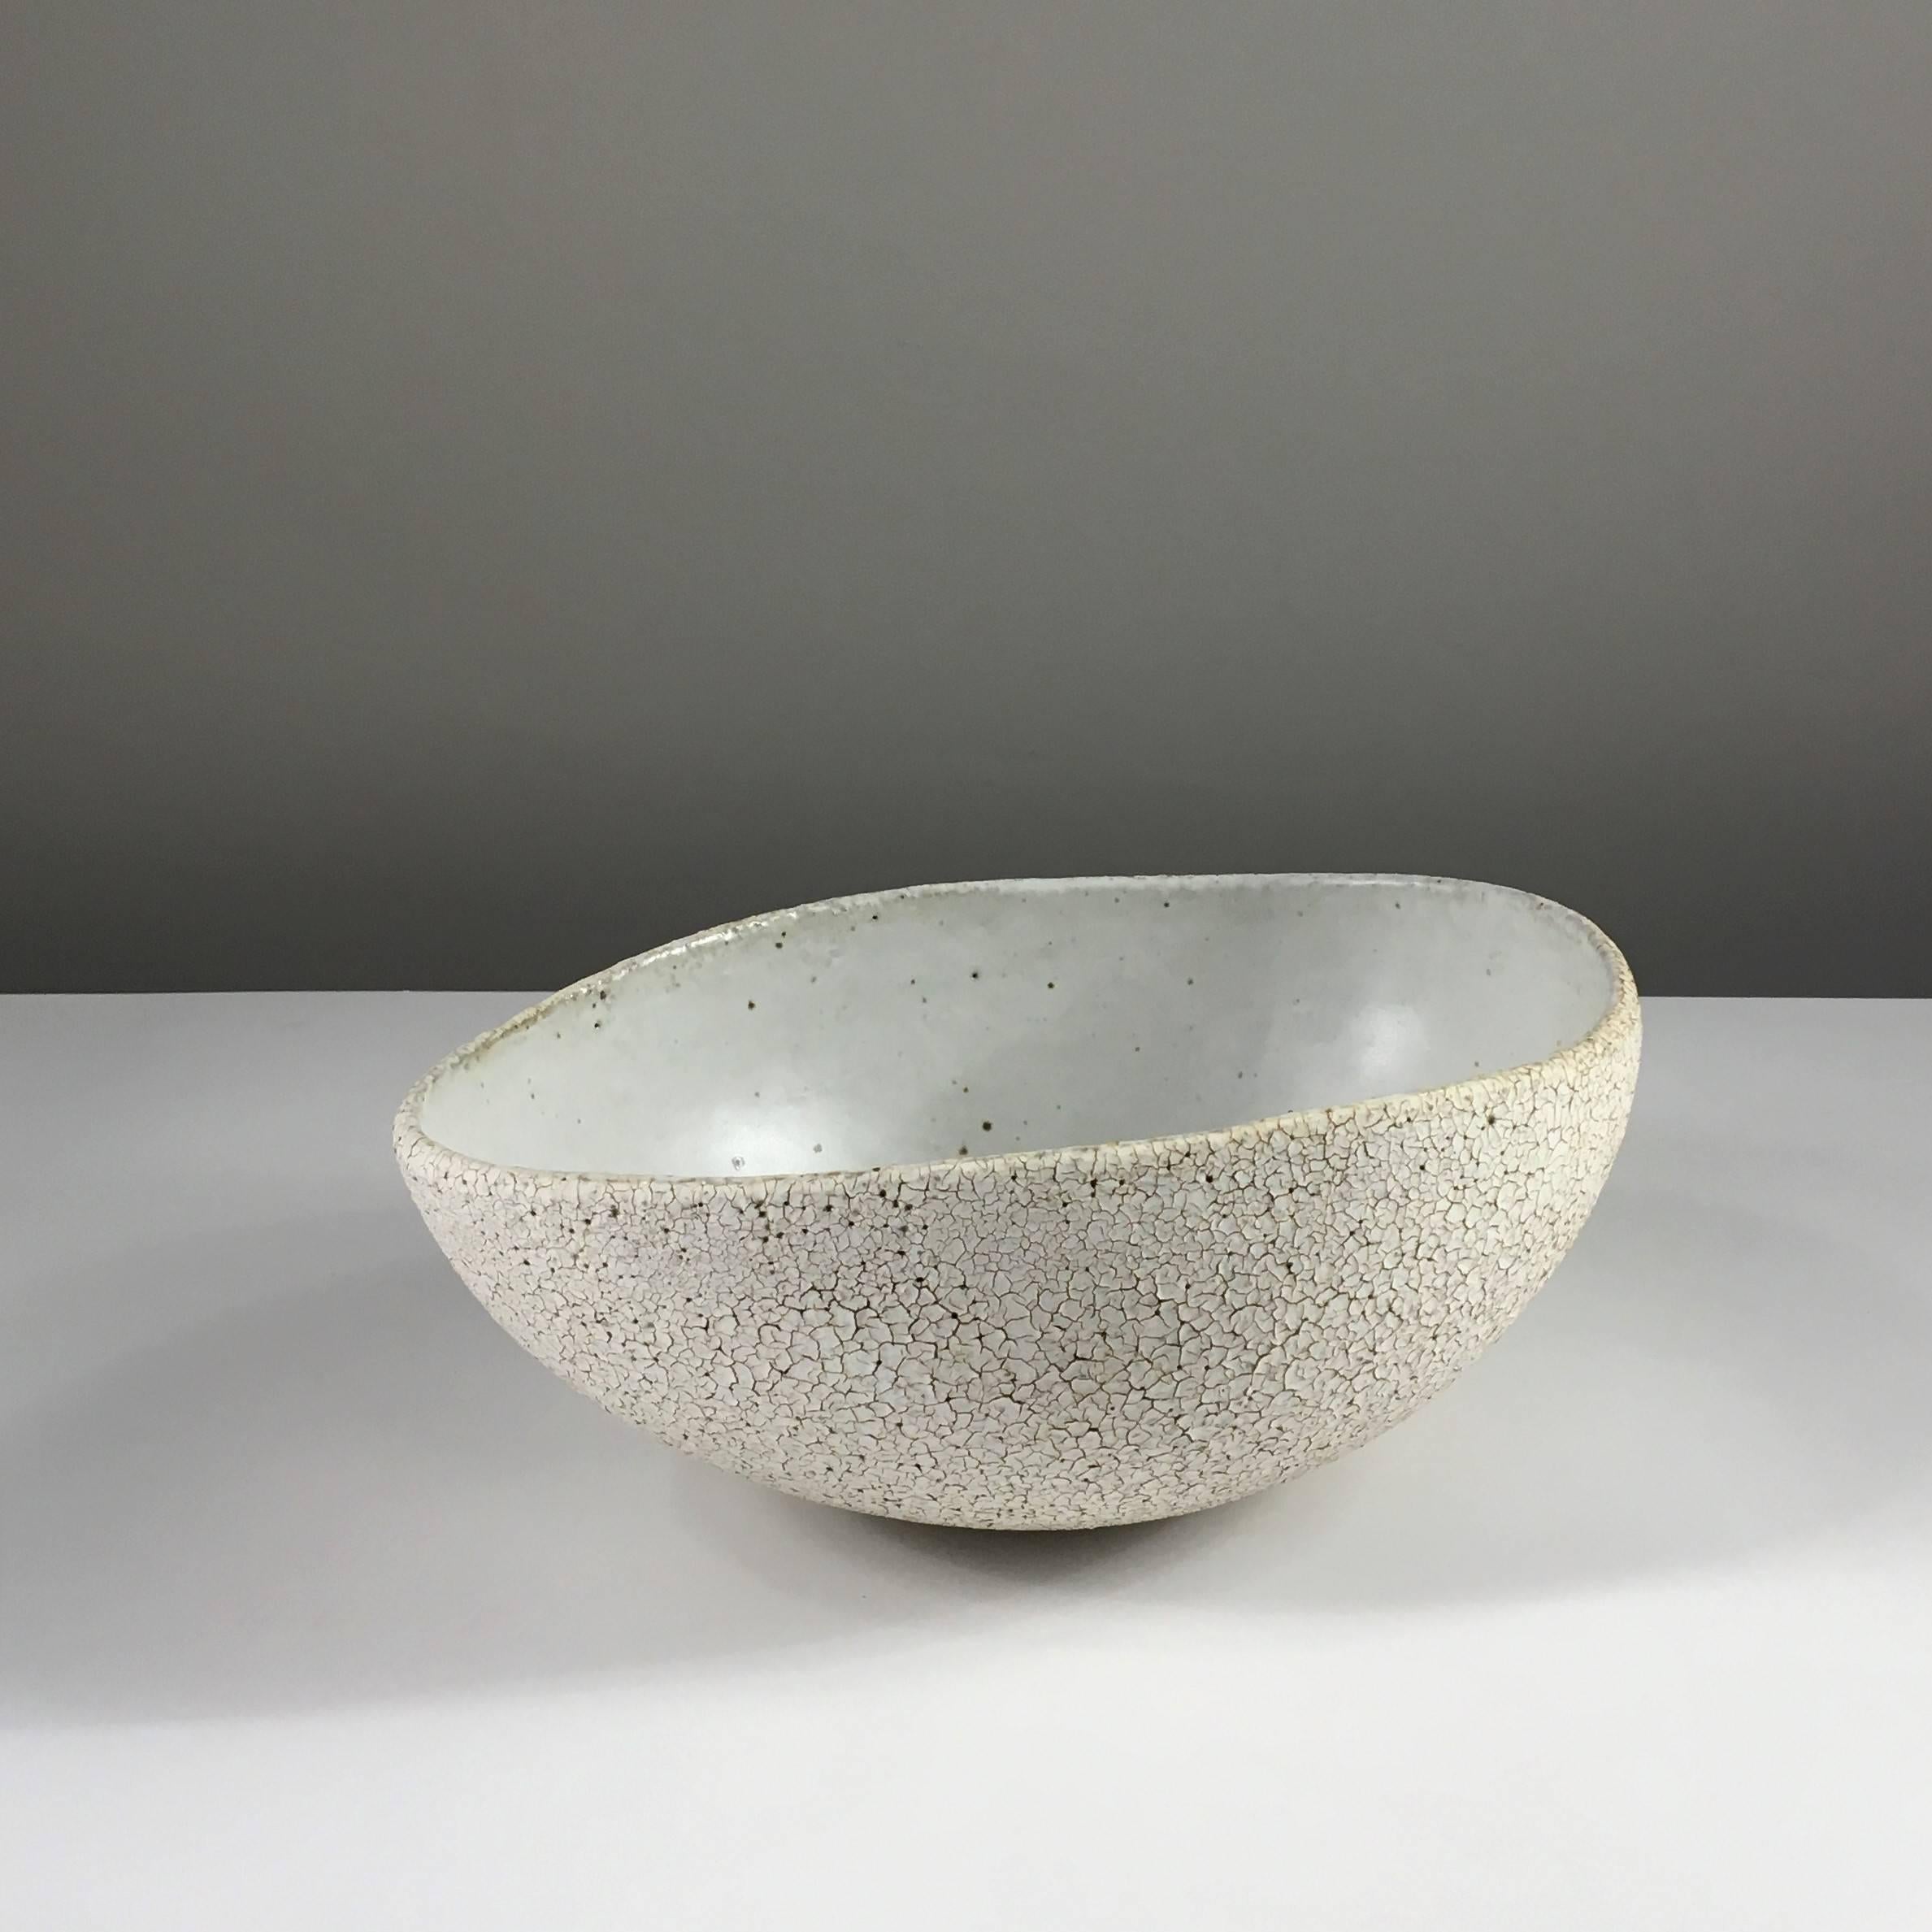 Contemporary ceramic artist Yumiko Kuga's glazed stoneware large bowl no. 119 is part of her Crackle Series. All of the pieces in this series are hand-built and 100% handmade so they are one-of-a-kind and thus vary slightly from one another. All